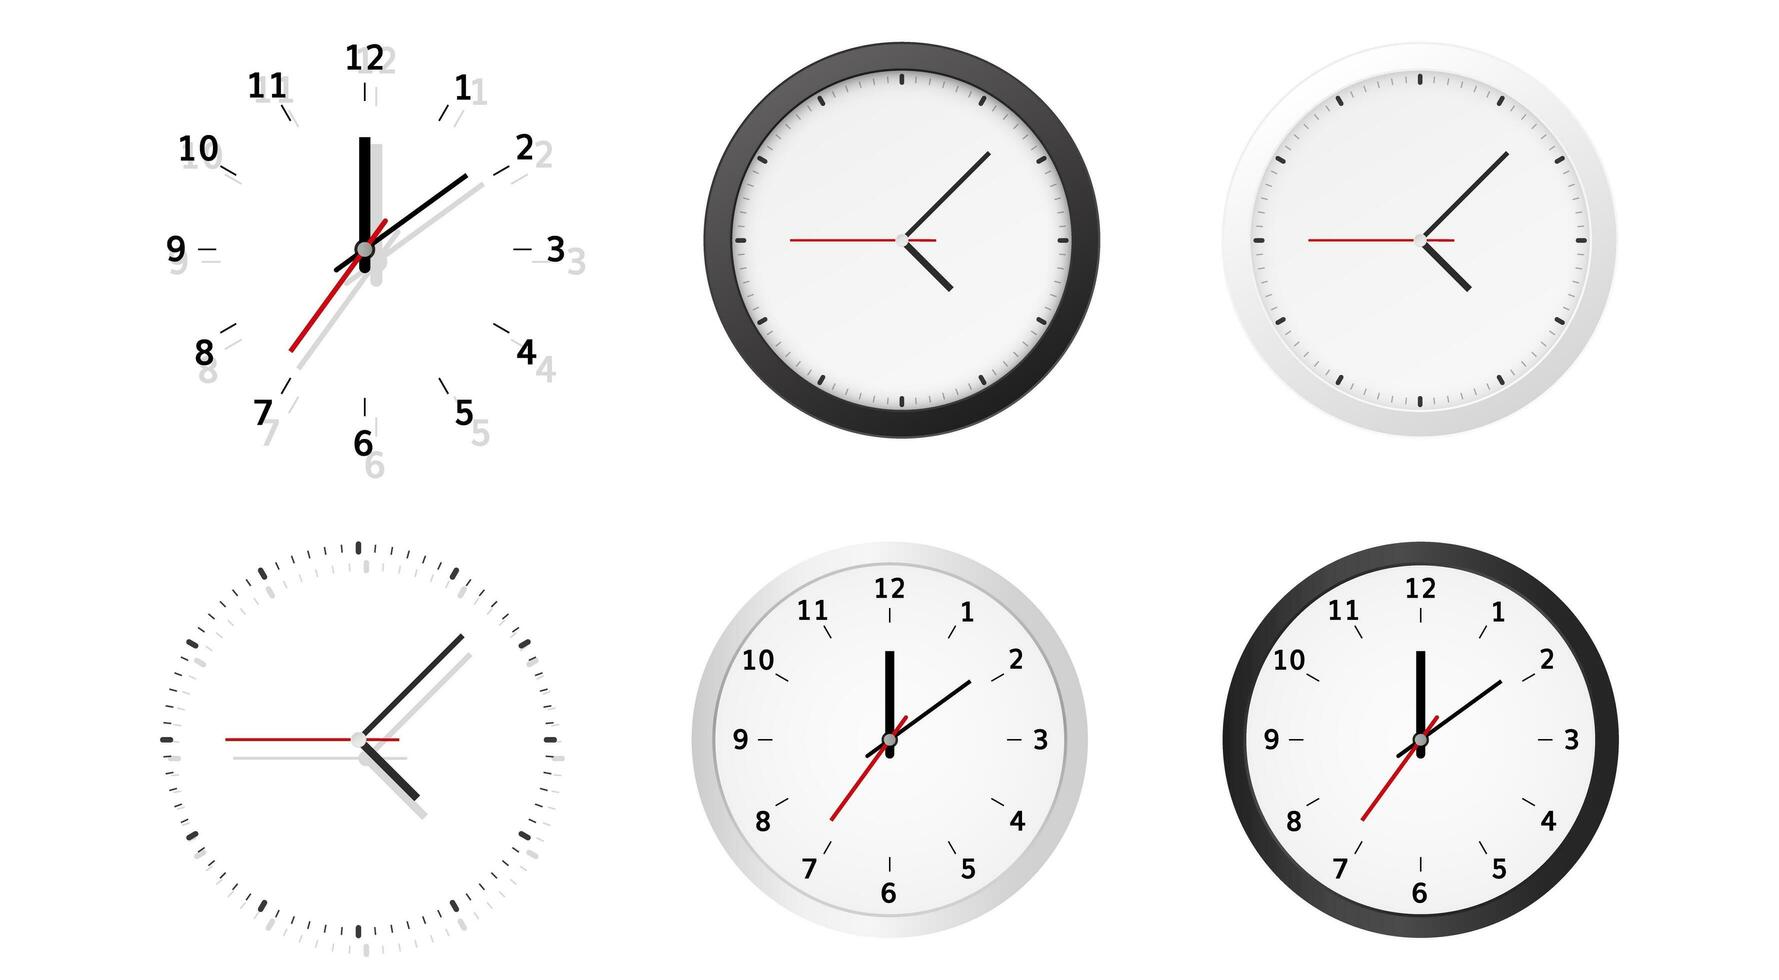 Collection of round analog dial clock faces vector